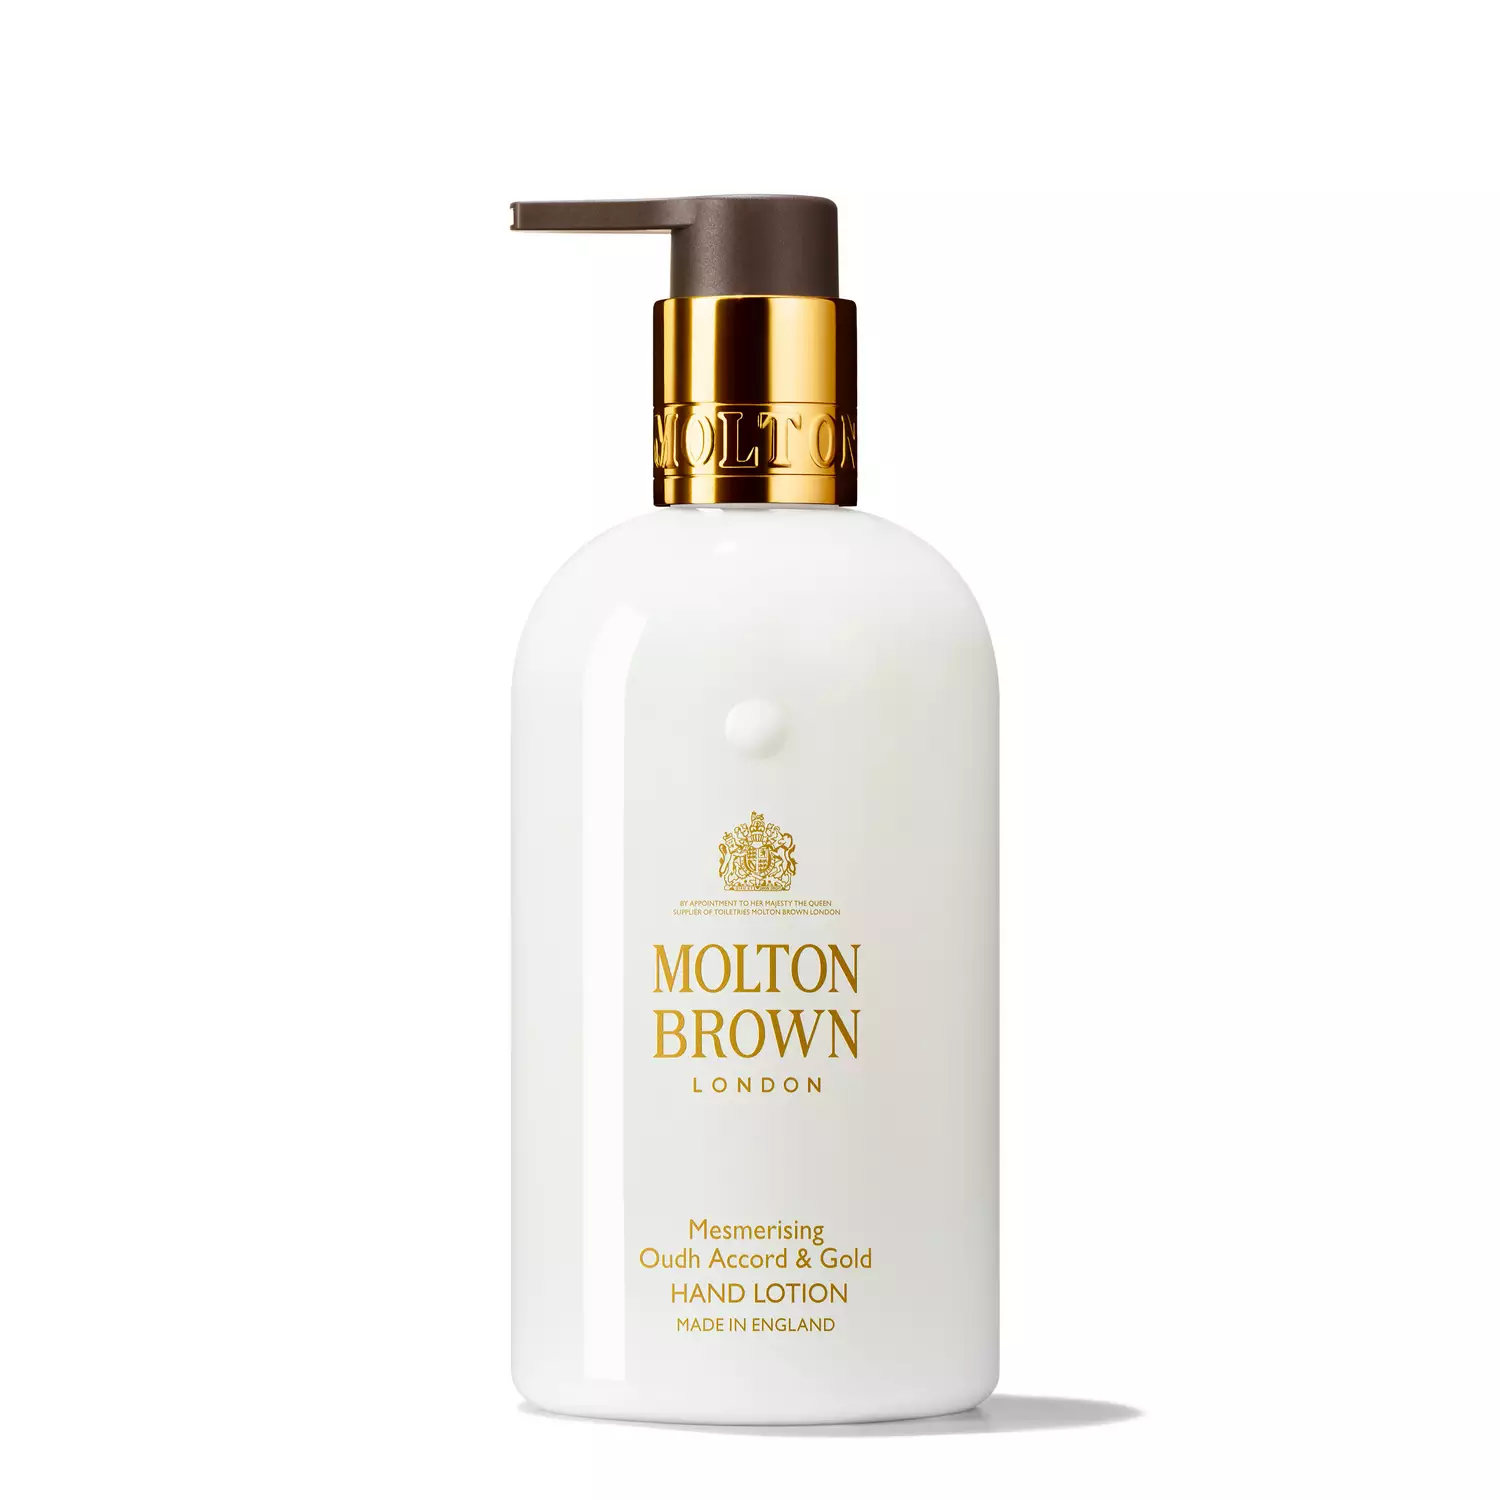 Molton Brown - Mesmerising Oudh Accord  & Gold -  Hand Lotion 